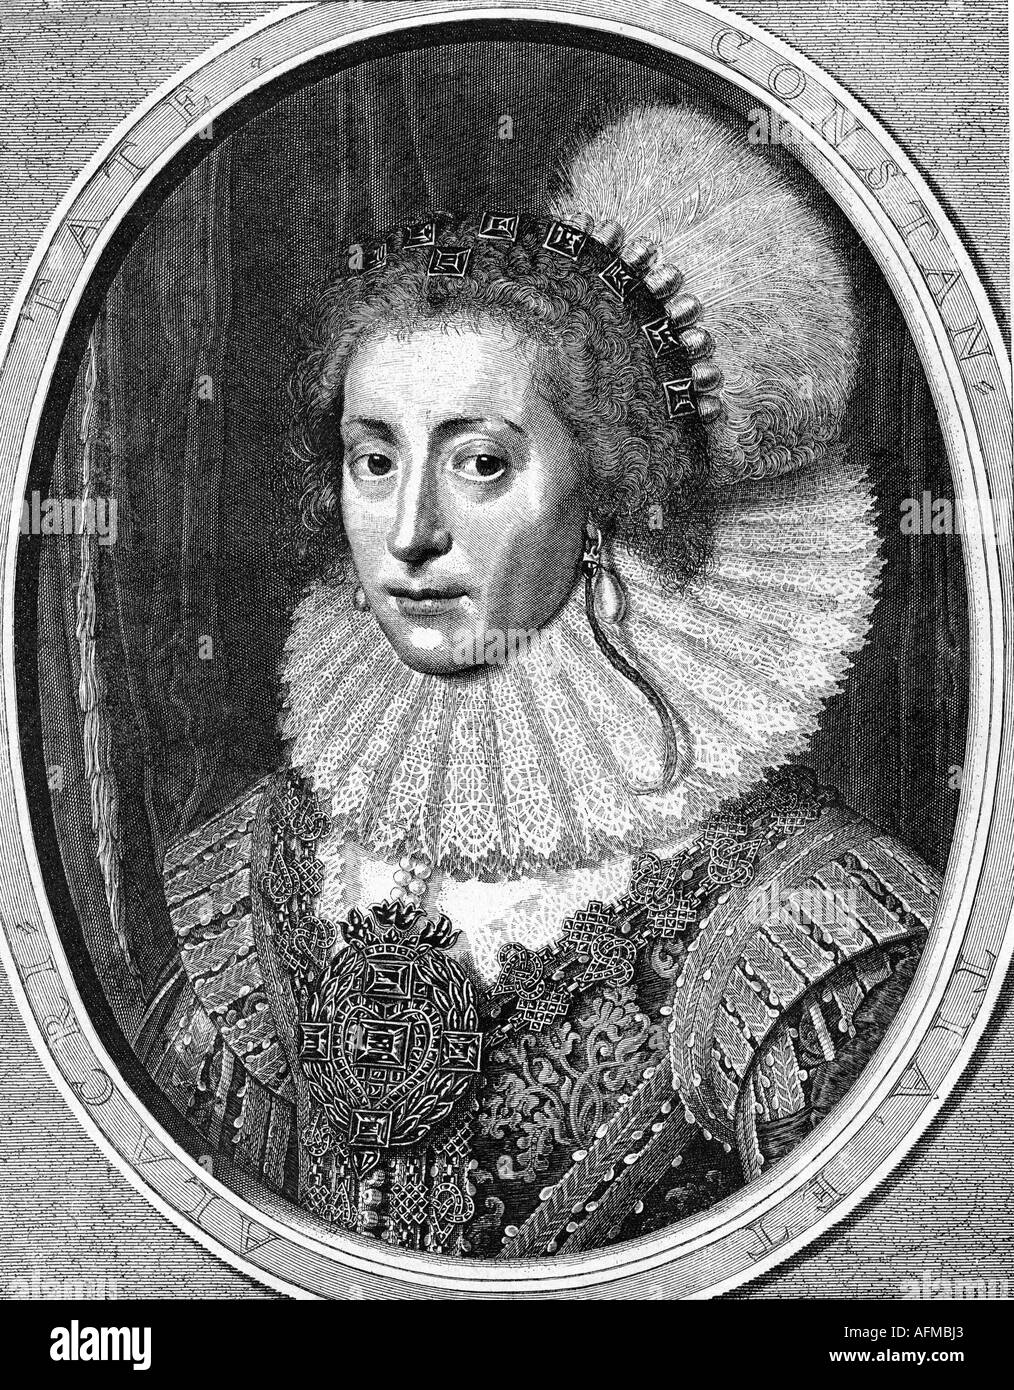 Elizabeth, 19.8.1556 - 13.12.1662, Electress of Palatinate 14.2.1613 - 23.2.1623, Queen consort of Bohemia 25.10.1619 - November 1620, portrait, conteporary engraving, Stuart, Princess of England & Scotland, Wittelsbach, thirty years war, jewelry, pearls, , Artist's Copyright has not to be cleared Stock Photo